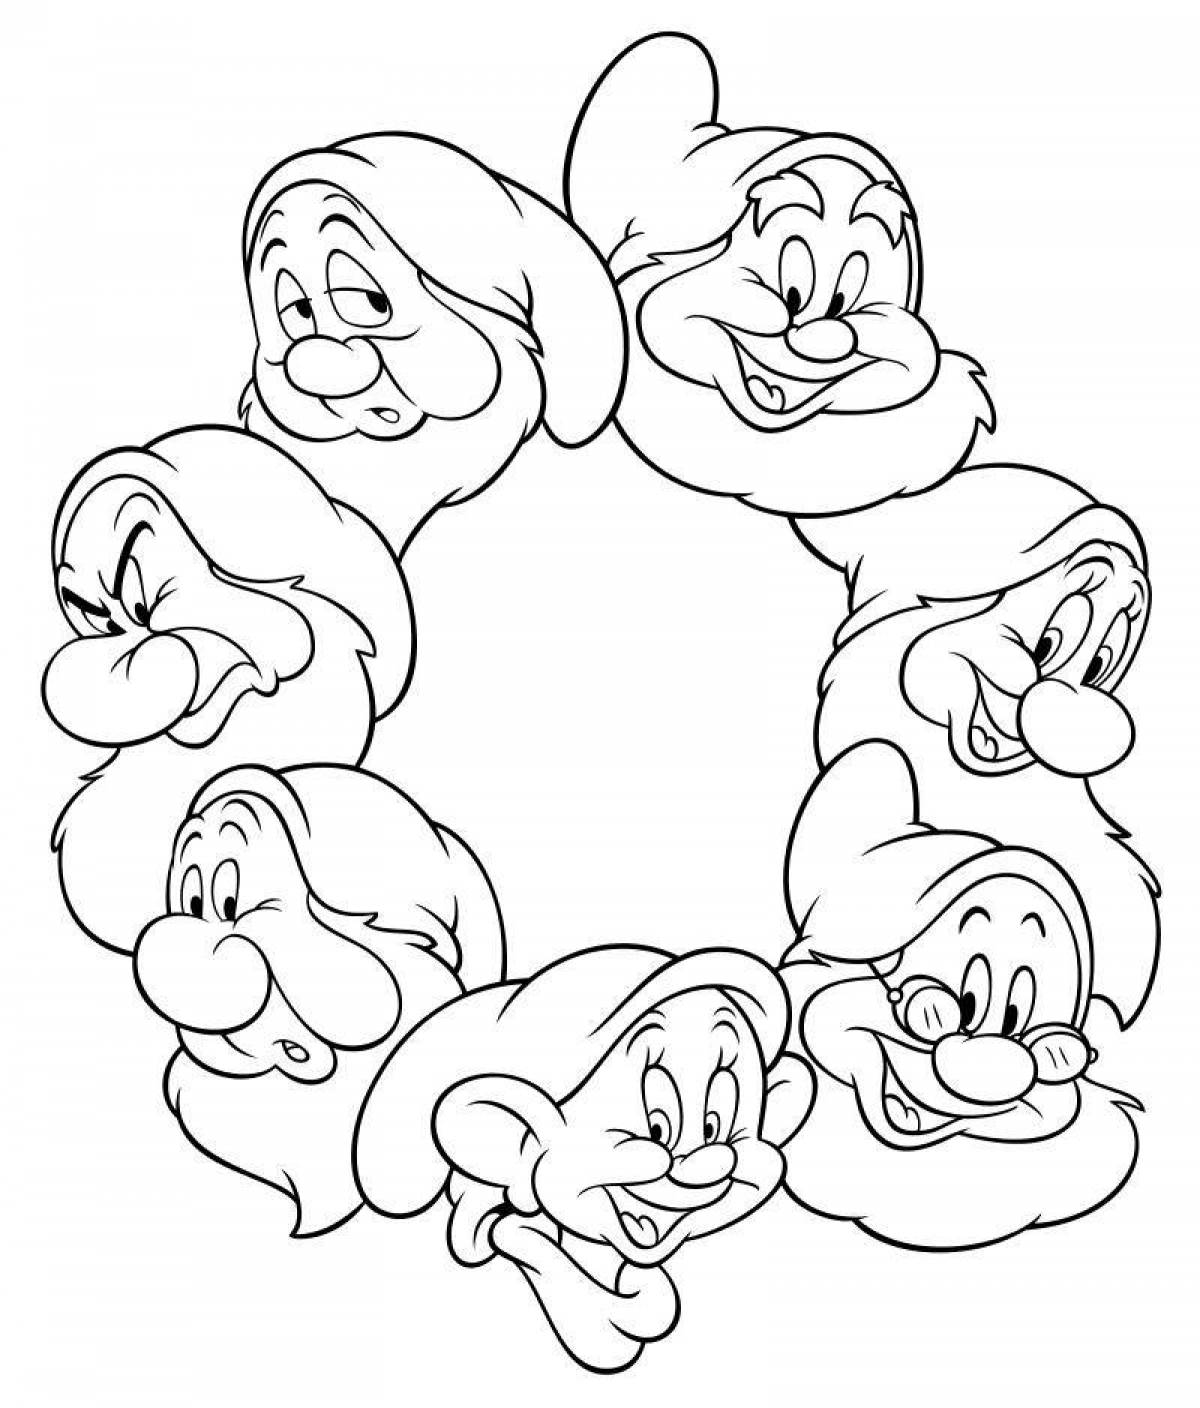 Coloring playful snow white and 7 dwarfs